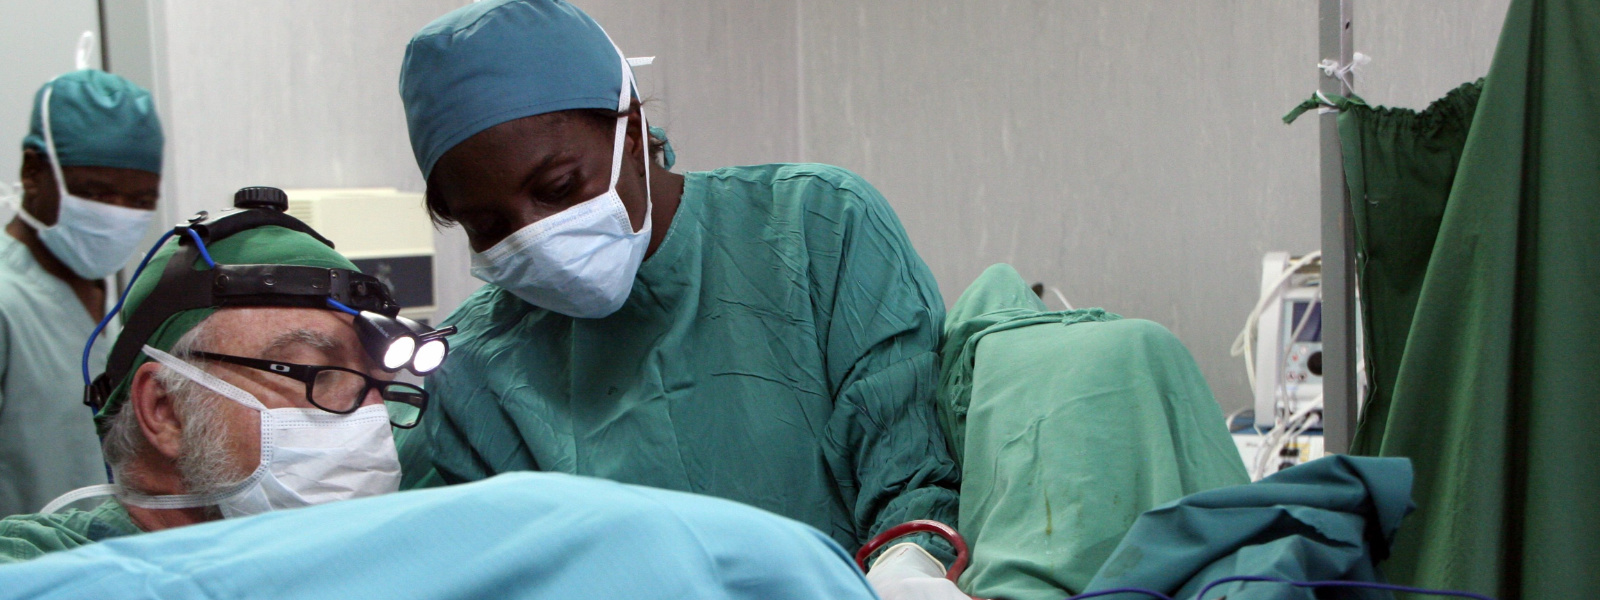 Surgeon in scrubs performing fistula surgery with nurse attending